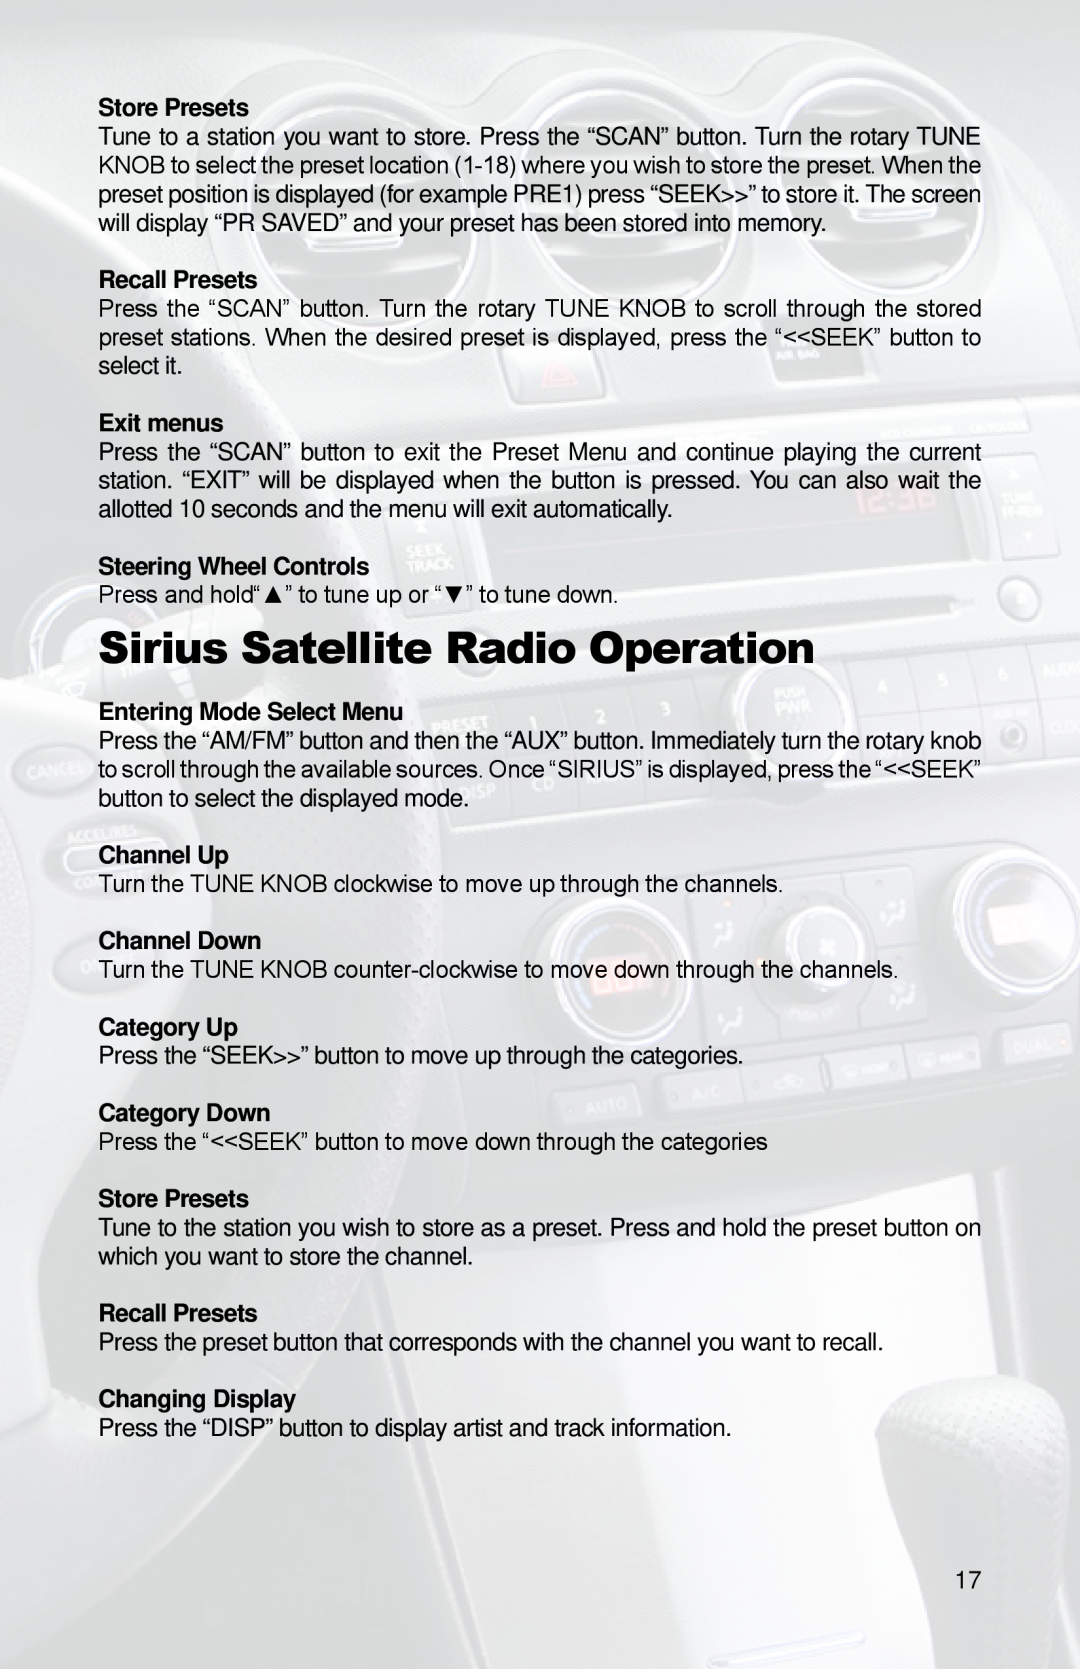 iSimple PGHNI2 owner manual Sirius Satellite Radio Operation, Press and hold“” to tune up or “” to tune down 